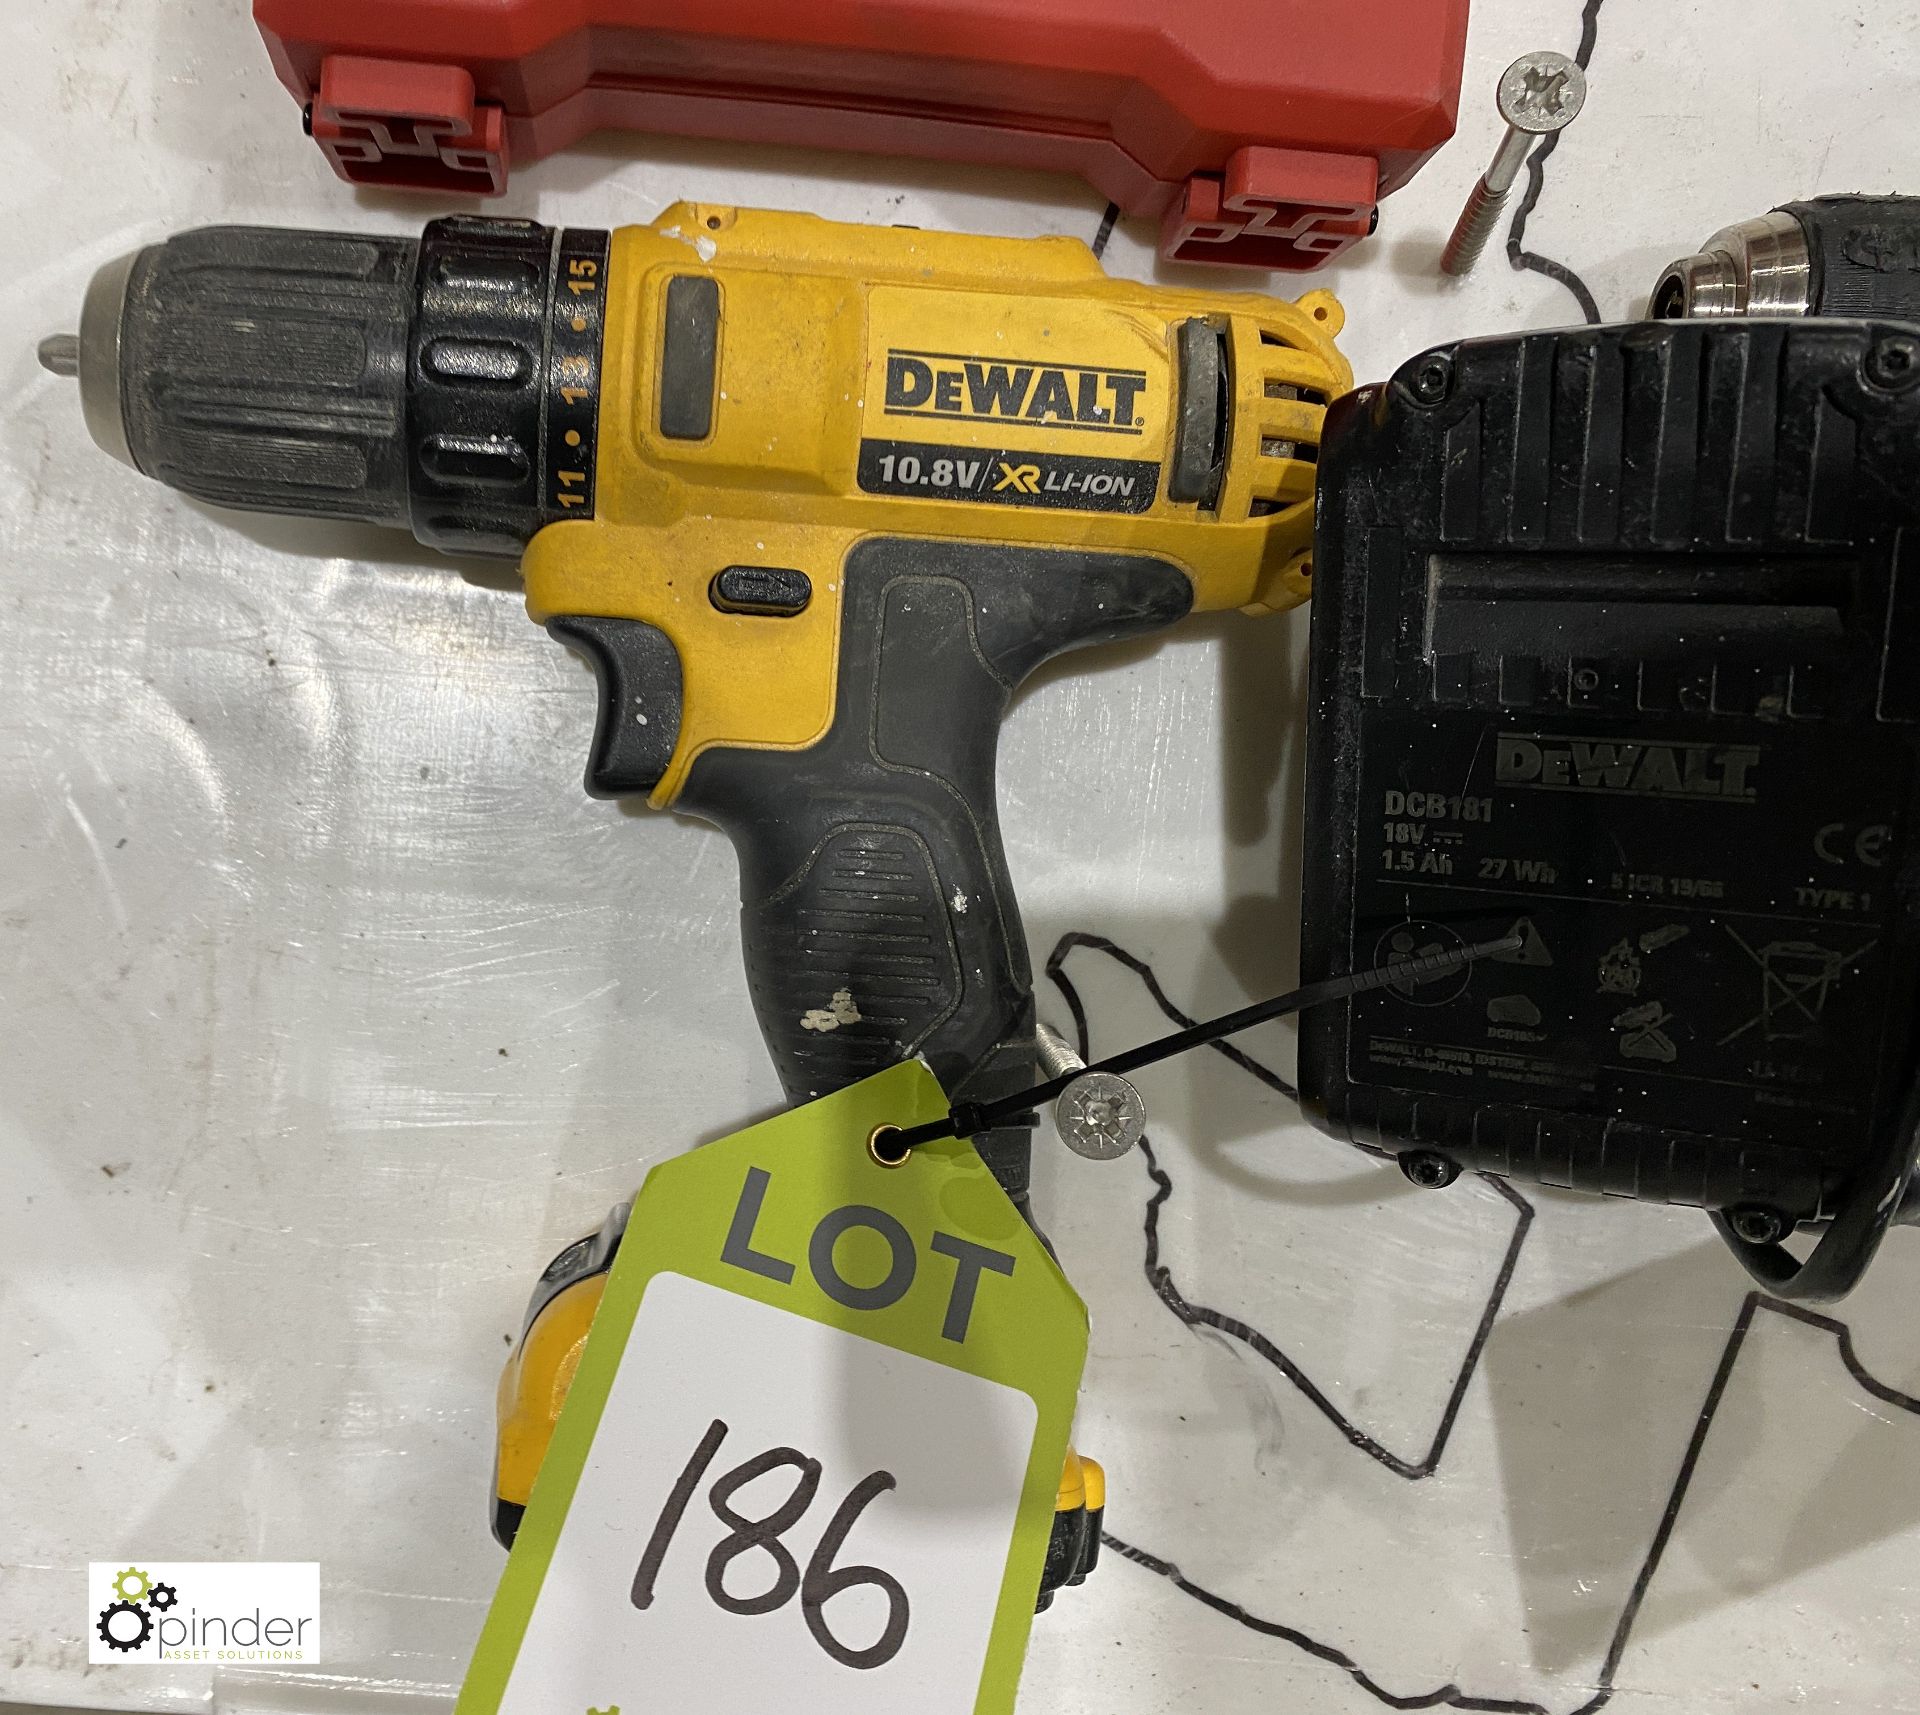 2 Dewalt Rechargeable Drills, Charger and quantity Drill Bits - Image 3 of 3